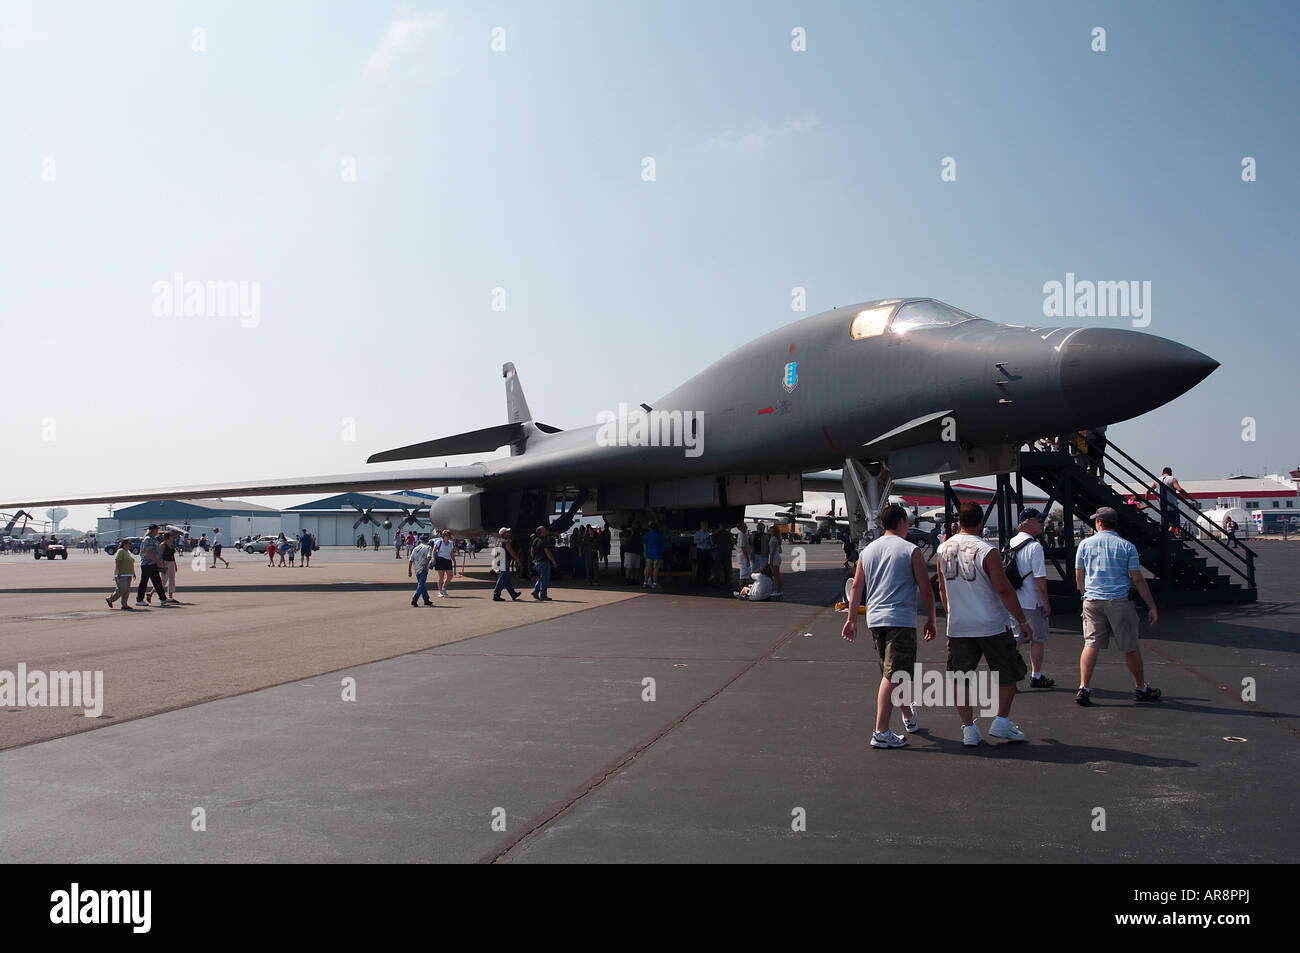 A B1 bomber on display at the Dayton Air Show Stock Photo